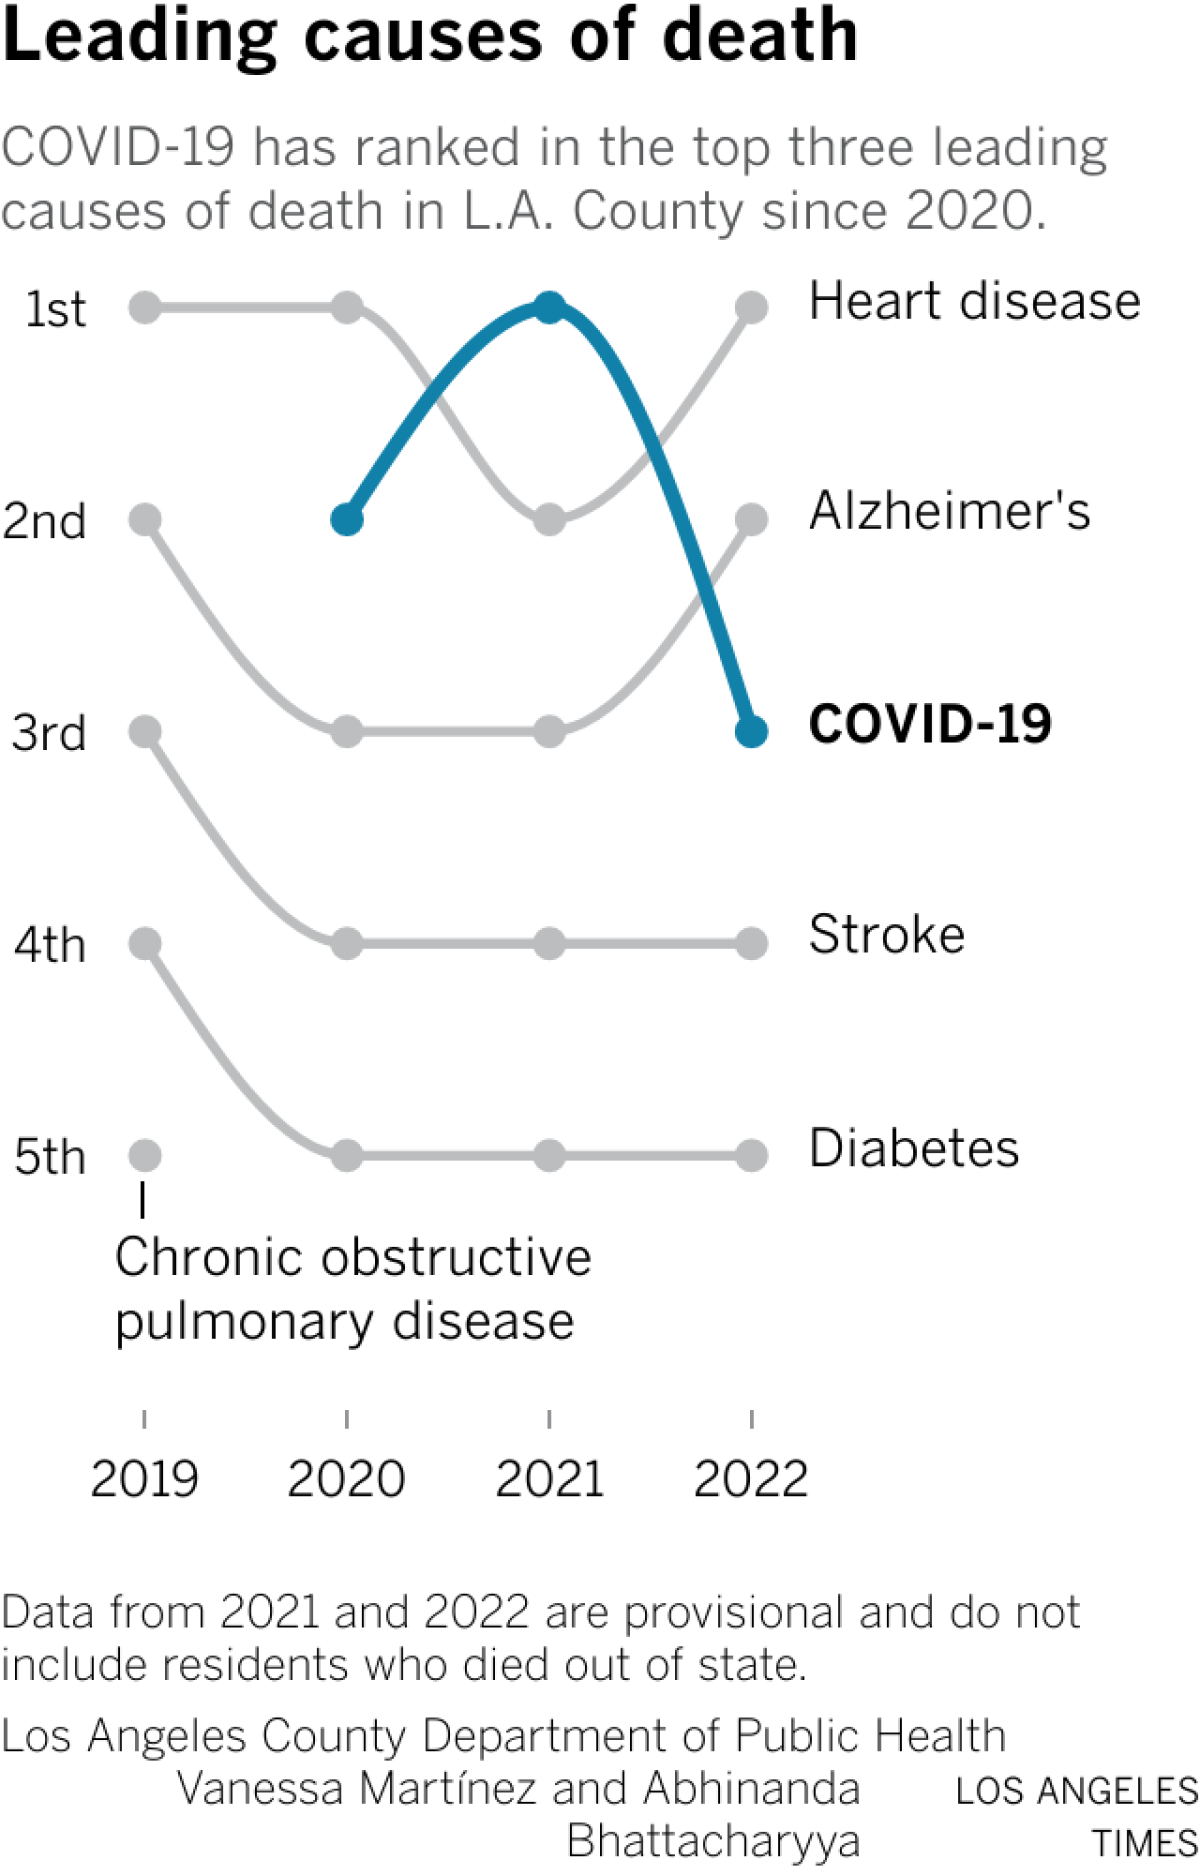 A chart showing the top five leading causes of death between 2019 and 2022, ranked. Since 2020, COVID-19 has been among the top three causes of death. In 2022, the leading causes were in the following order: heart disease, Alzheimer's, COVID-19, stroke and diabetes.